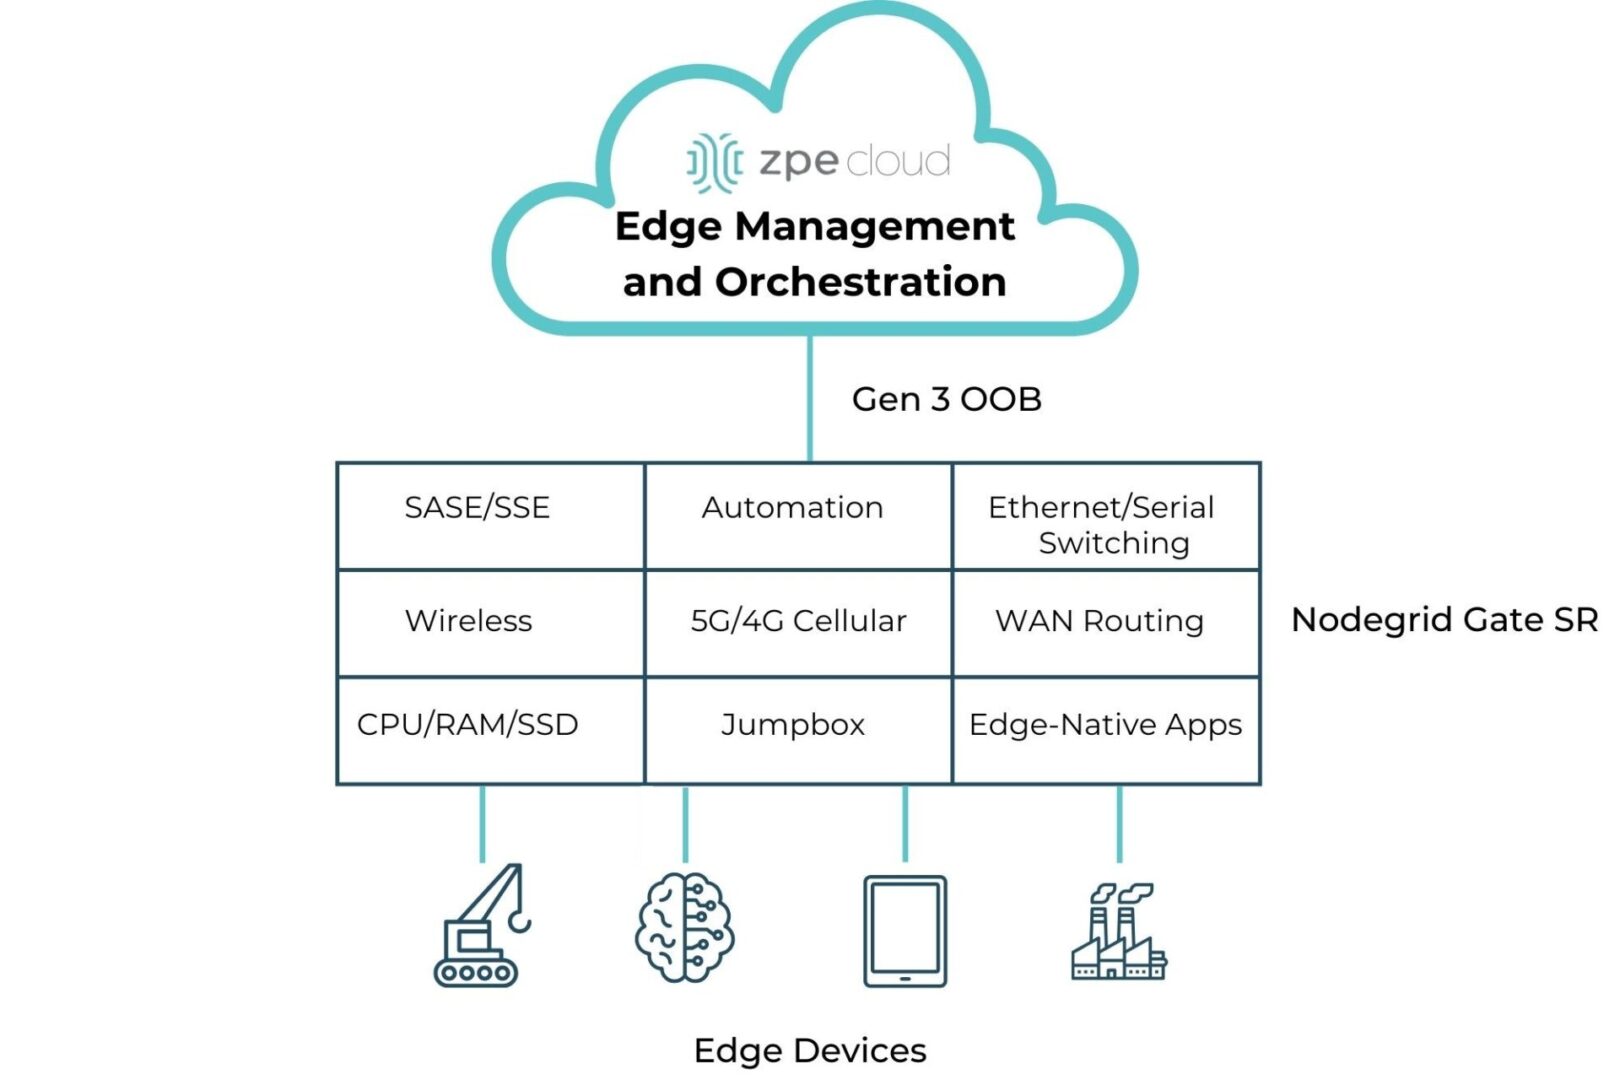 A diagram showing all the edge computing and networking capabilities provided by the Nodegrid Gate SR